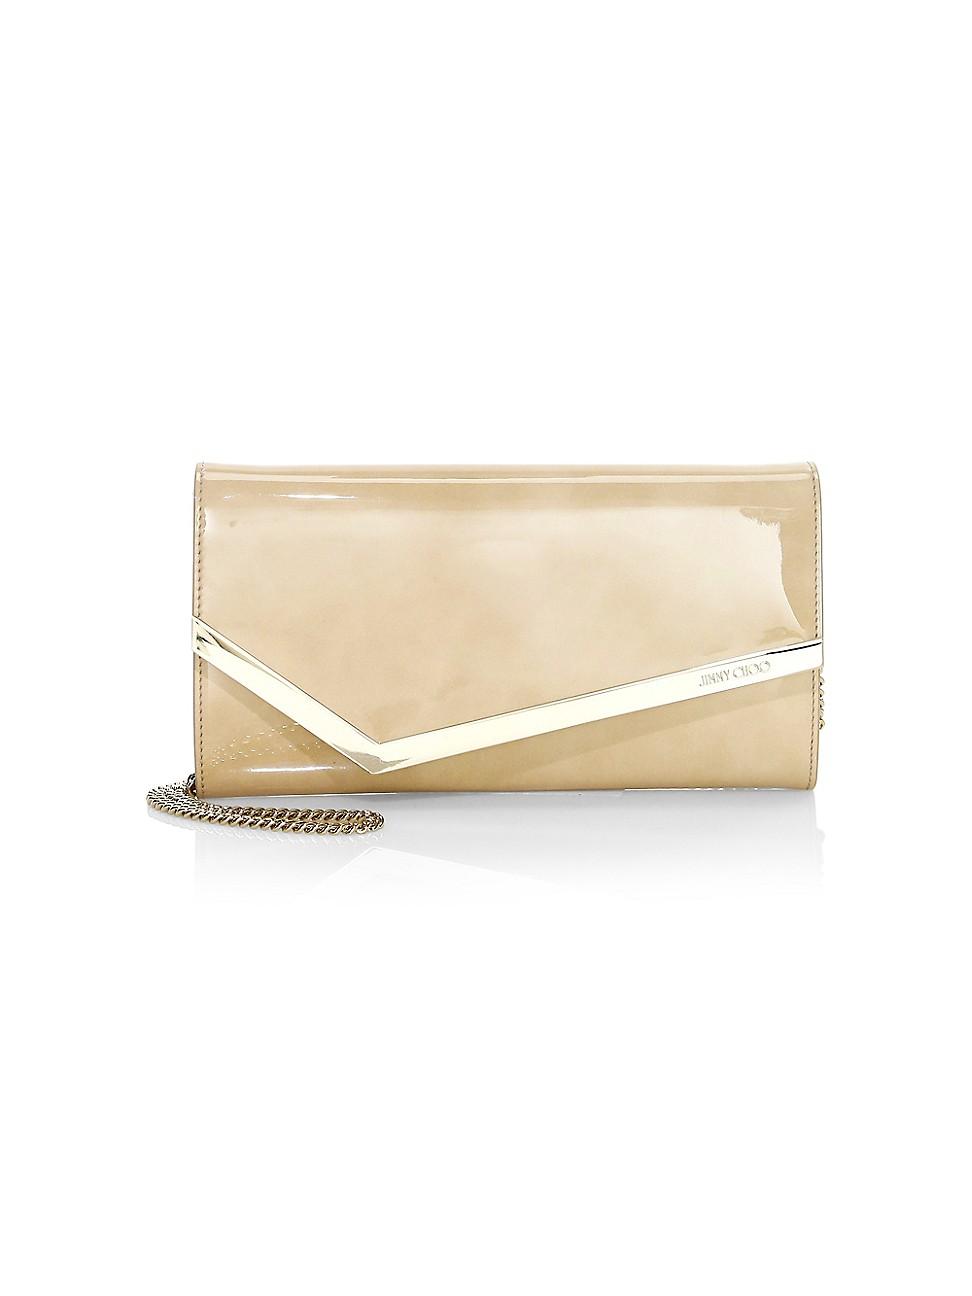 Jimmy Choo Milla Patent Leather & Suede Clutch in Natural